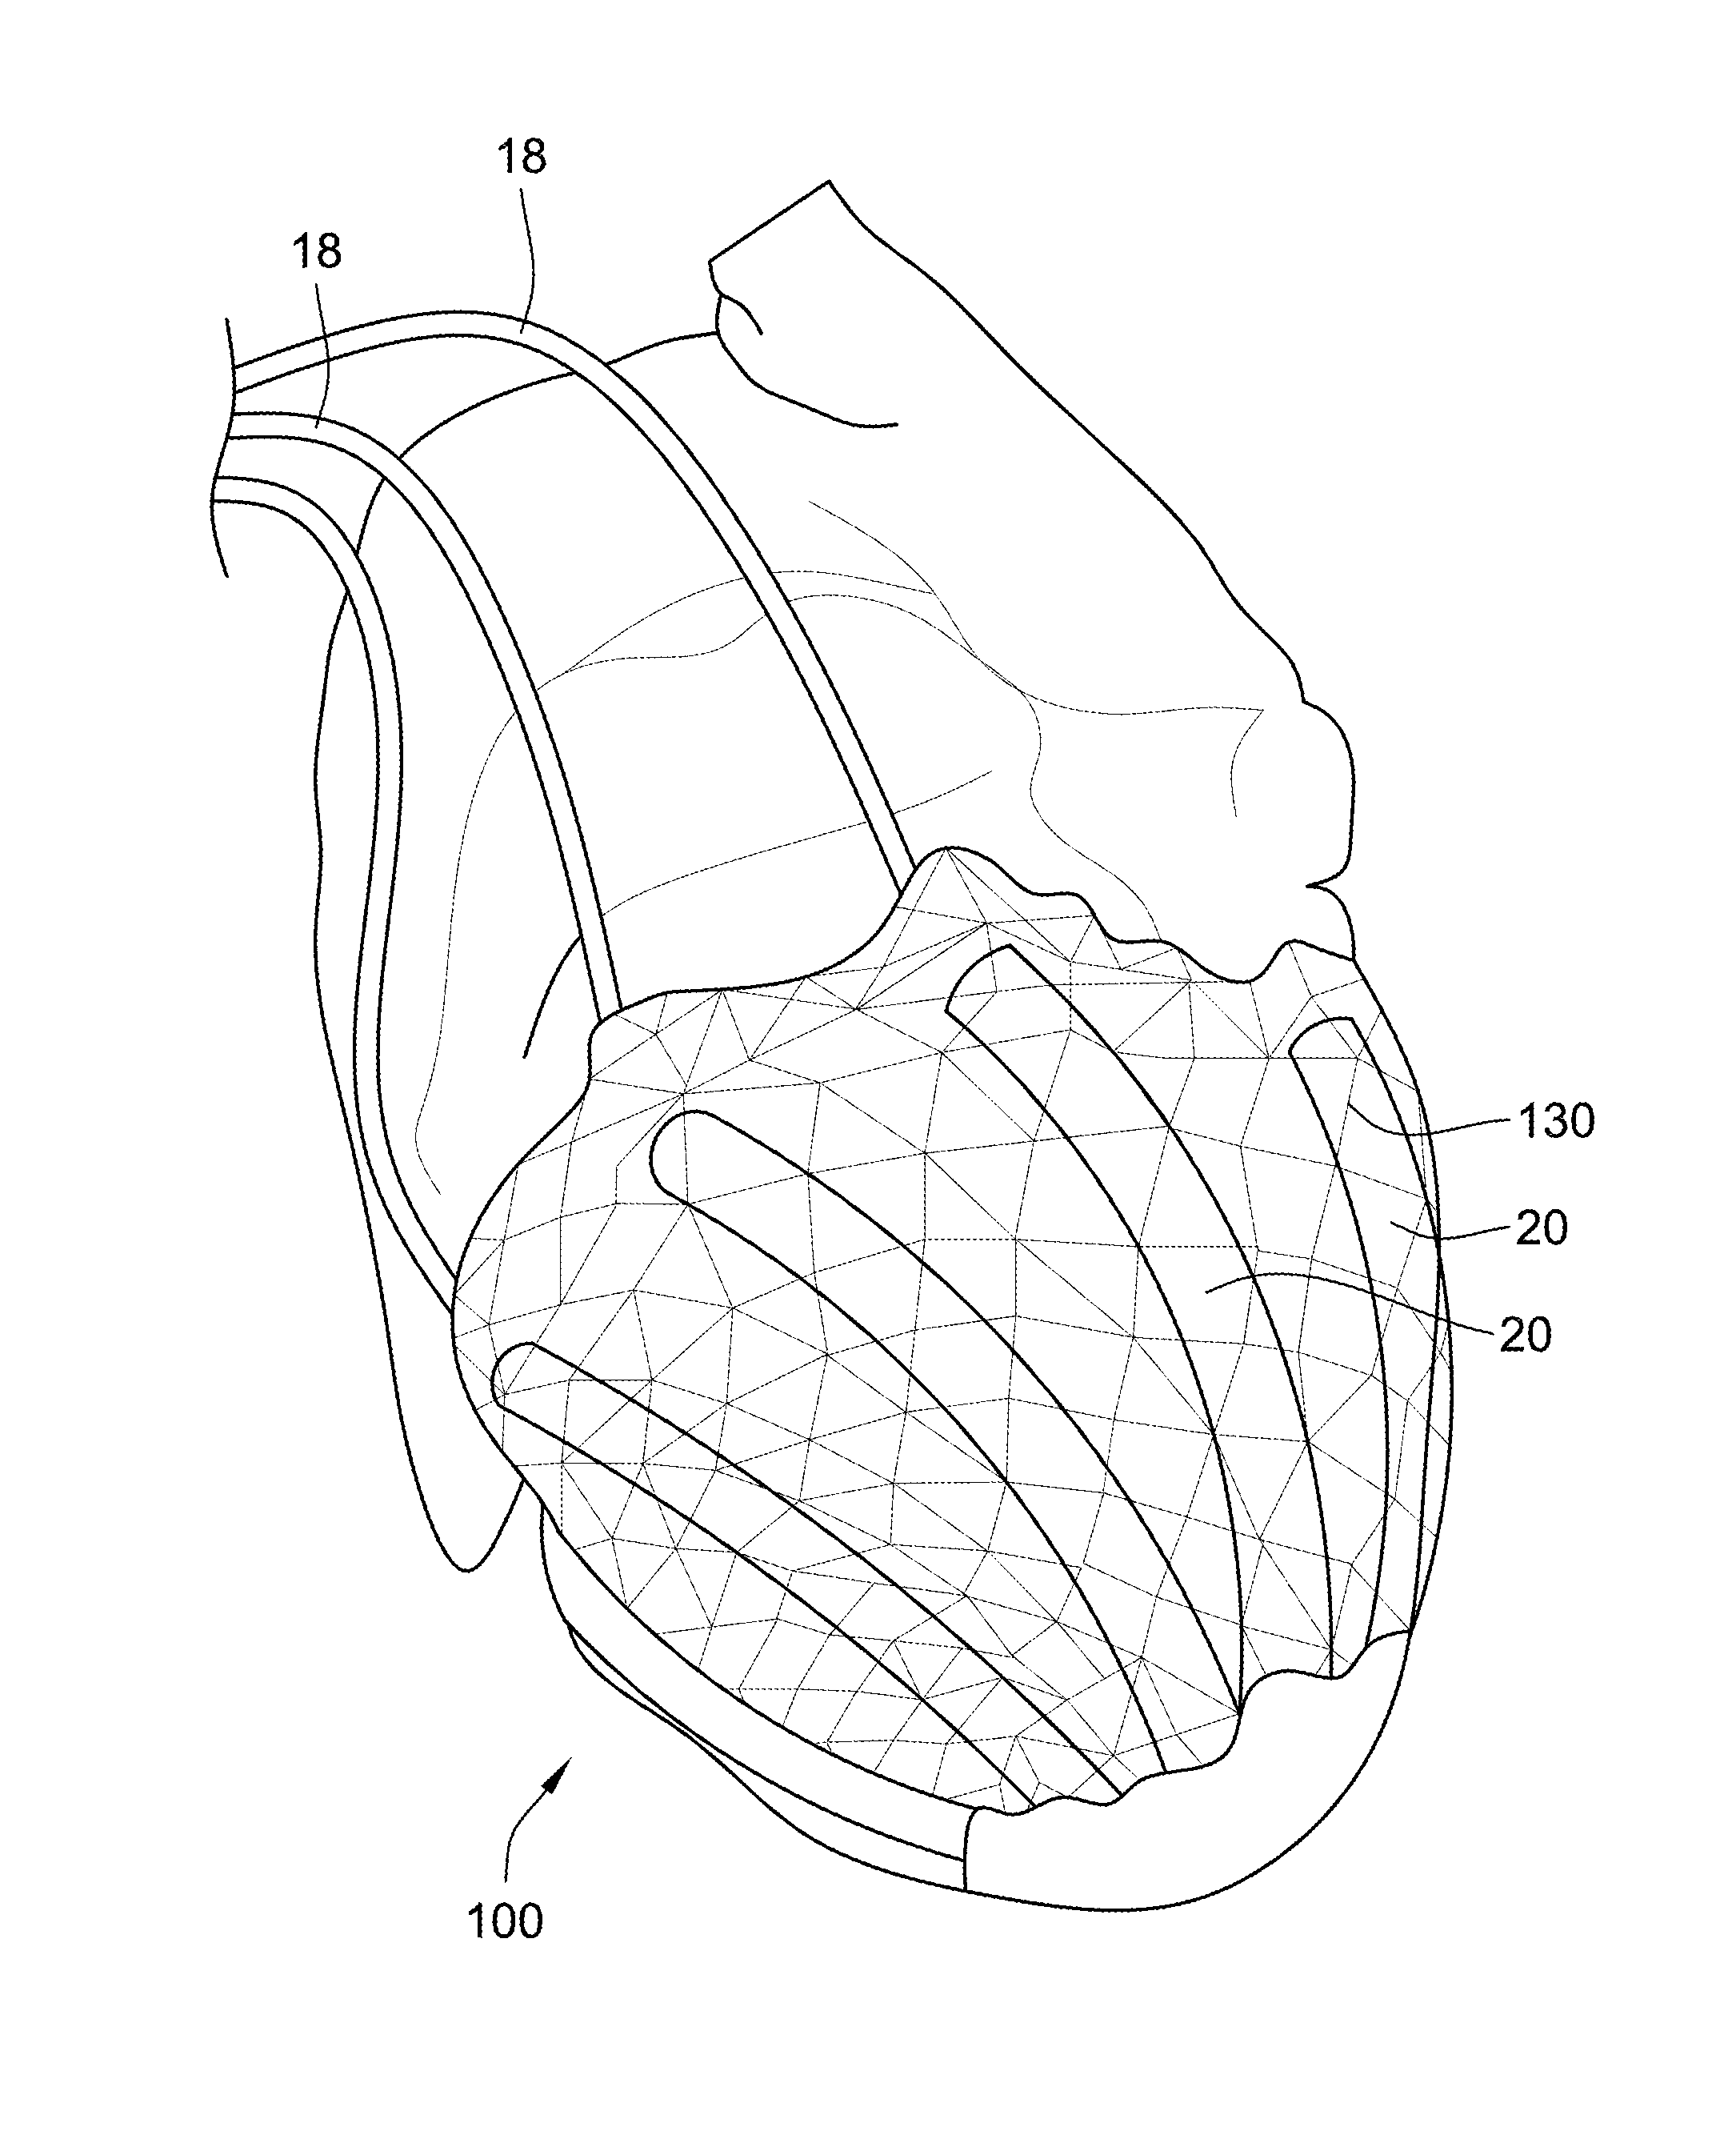 Biomimetic actuation device and system, and methods for controlling a biomimetic actuation device and system